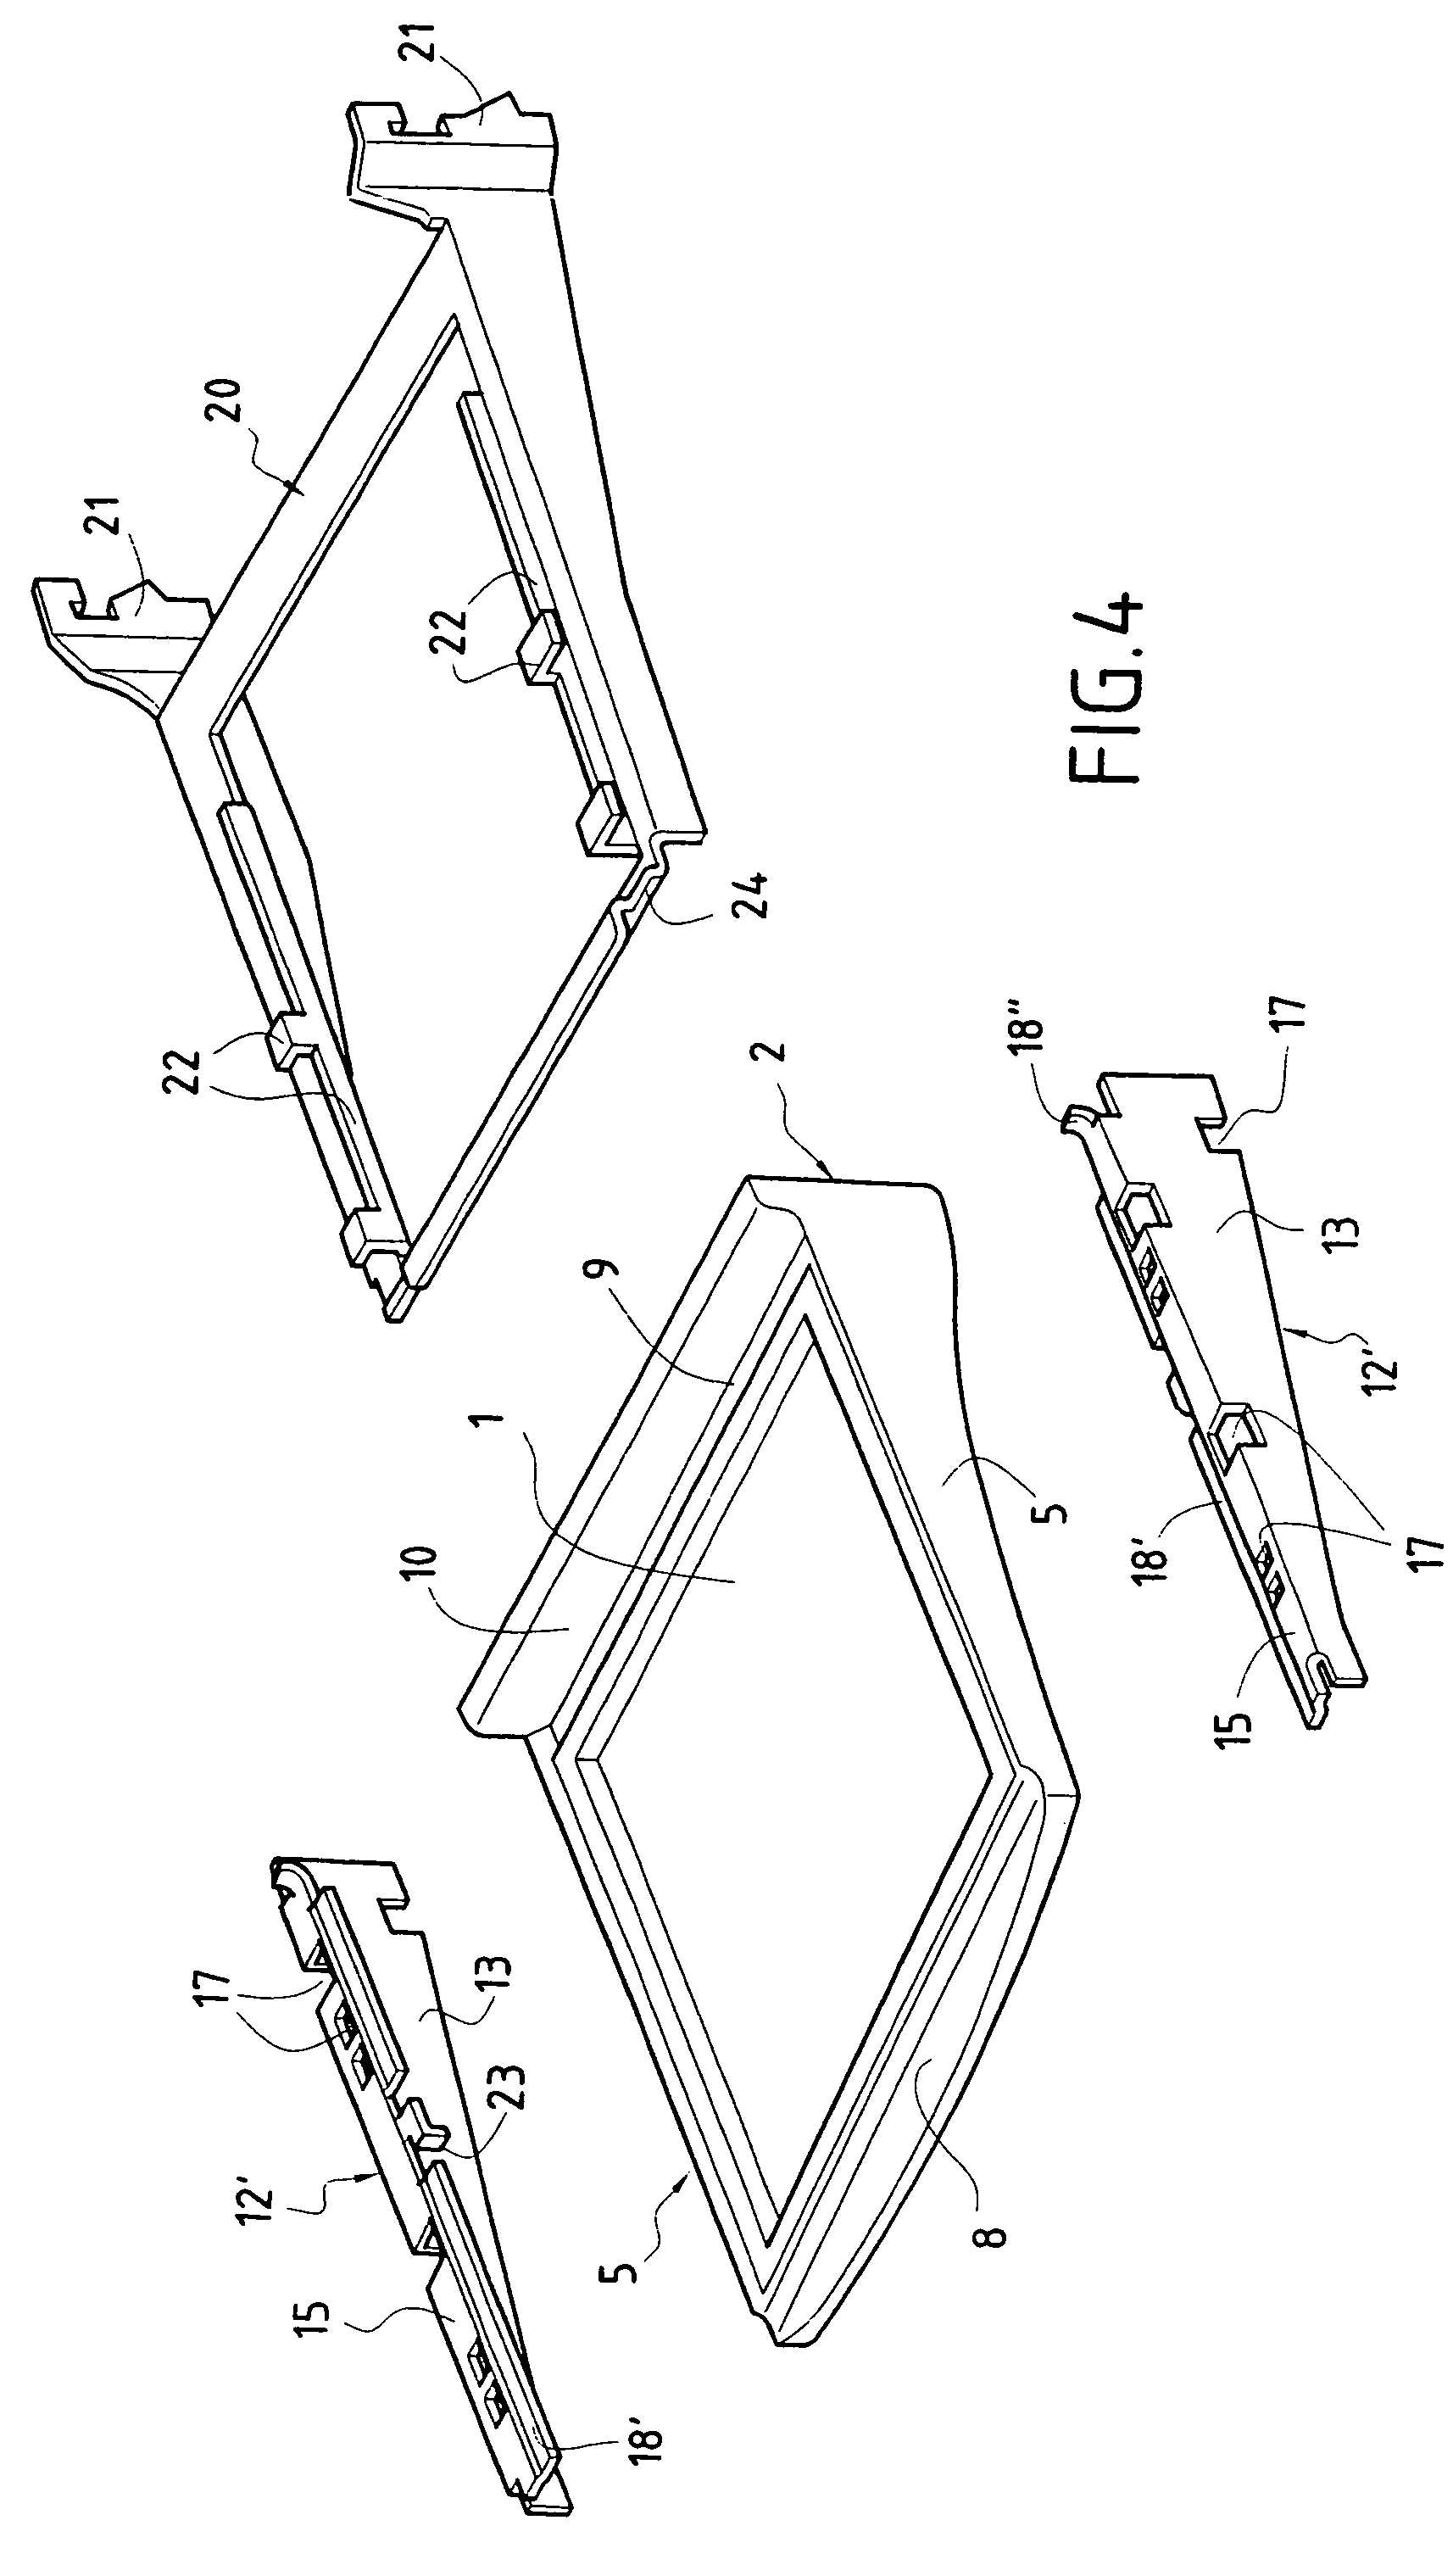 Shelf for supporting articles, particularly in refrigerated installations